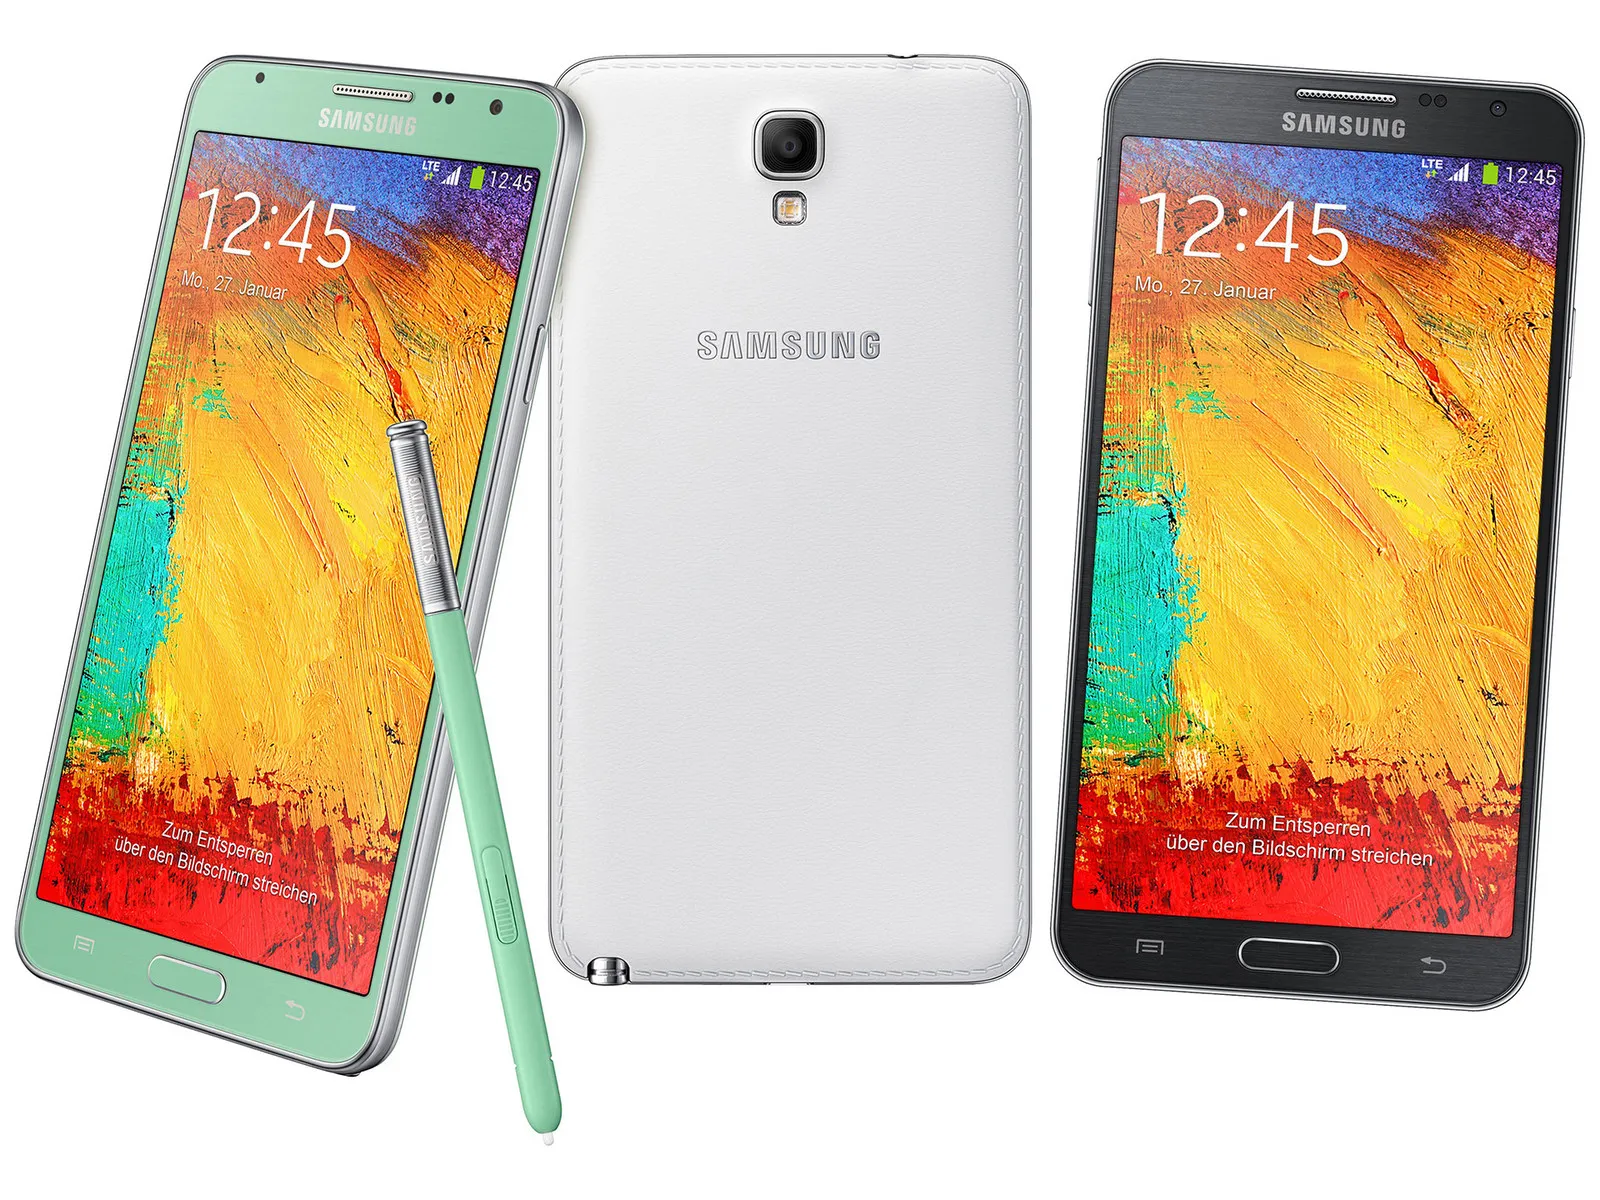 After a system update, the Samsung Galaxy Note 3 Neo Duos does not vibrate.